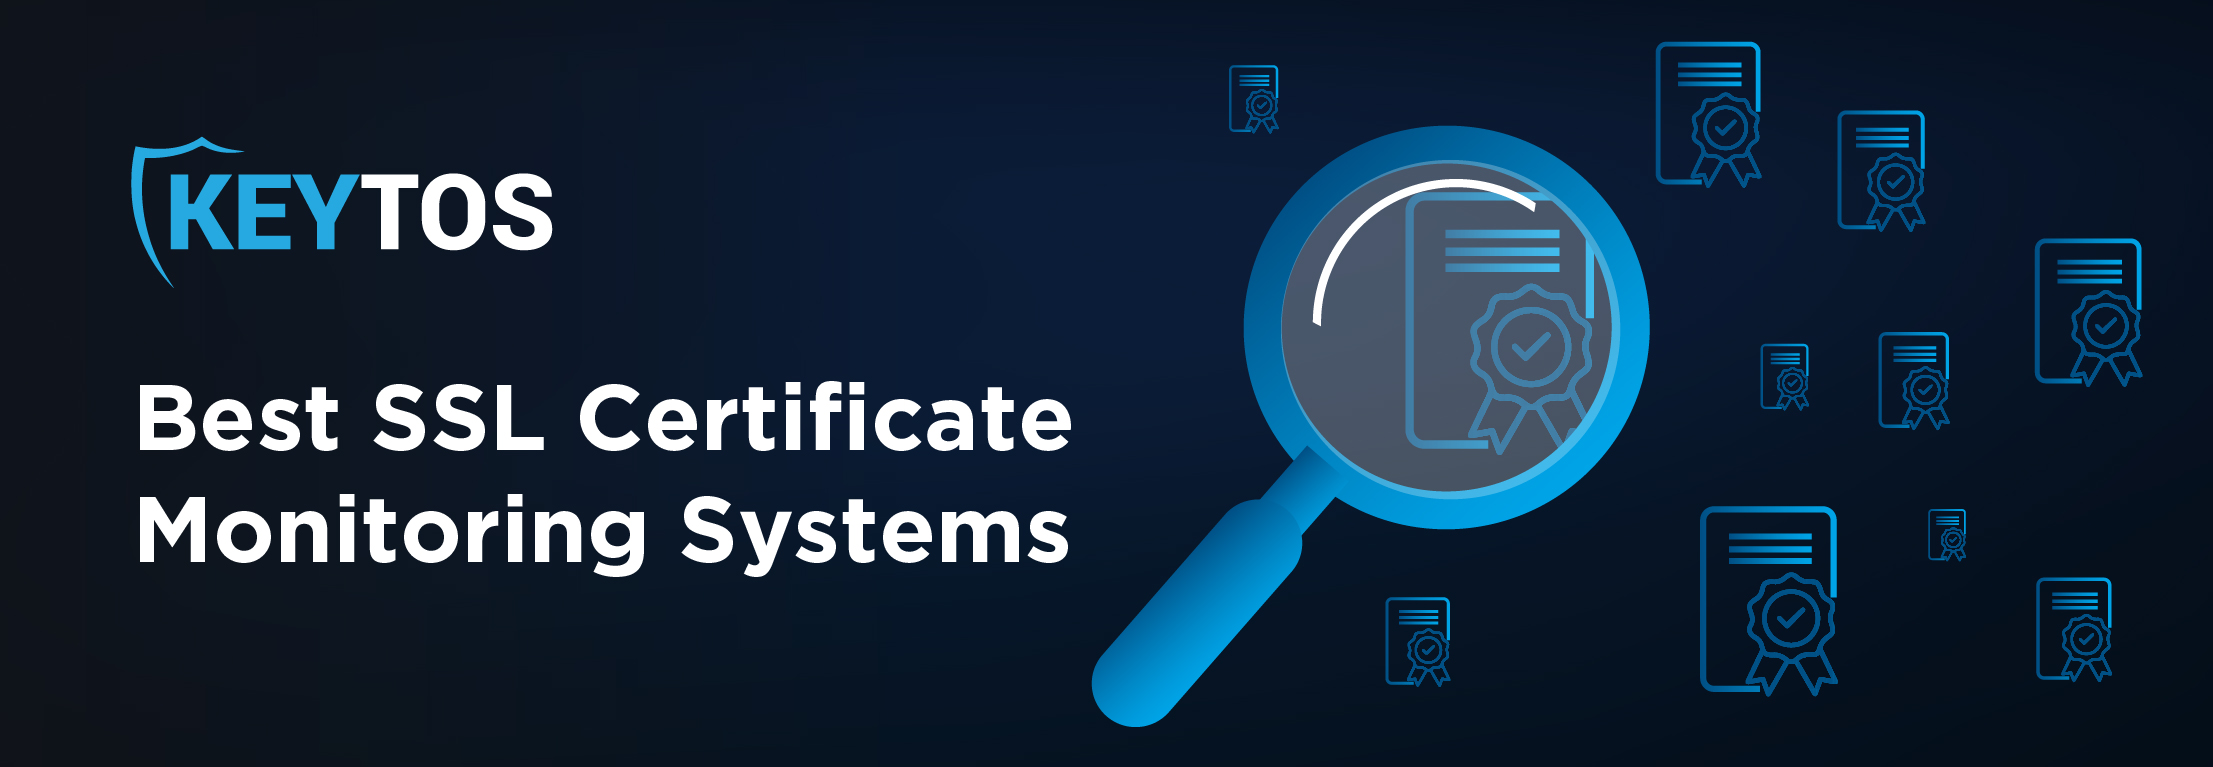 Best SSL Certificate Monitoring Systems